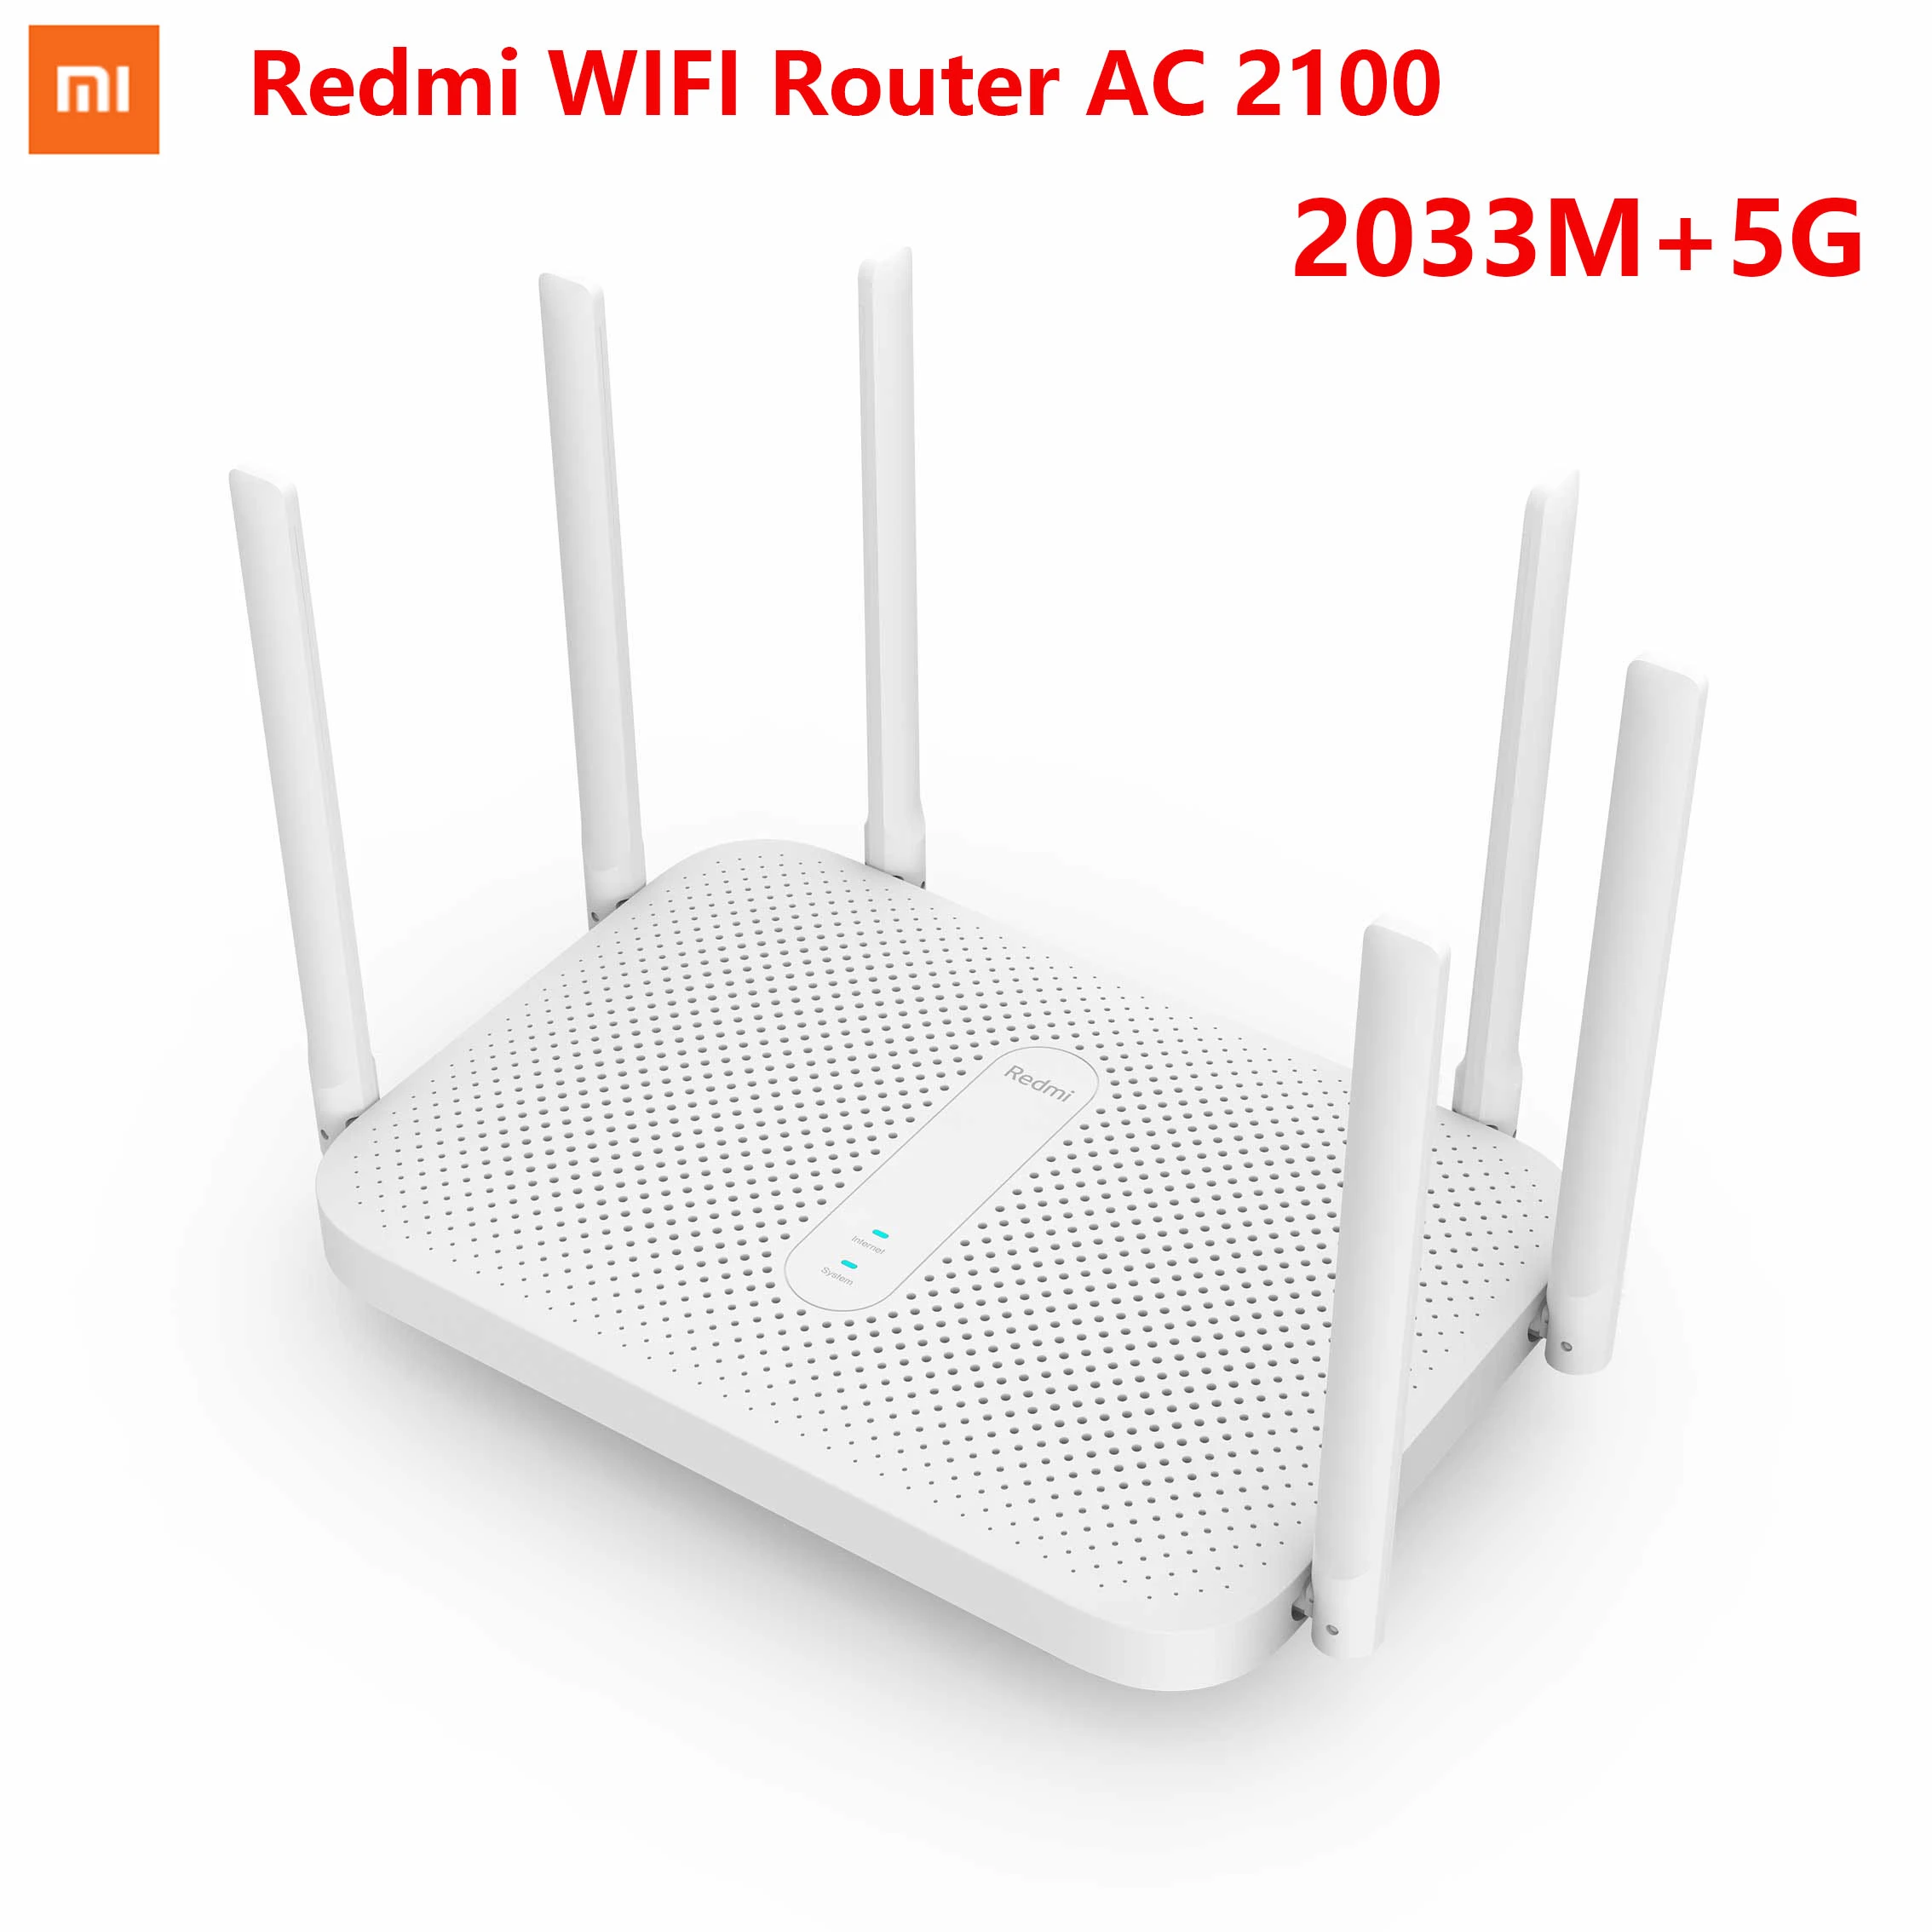 Xiaomi Redmi Ac2100 Router Gigabit 2 4g 5 0ghz Dual Band 2033mbps Wireless Router Wifi Repeater With 6 High Gain Antennas Wider Wireless Routers Aliexpress